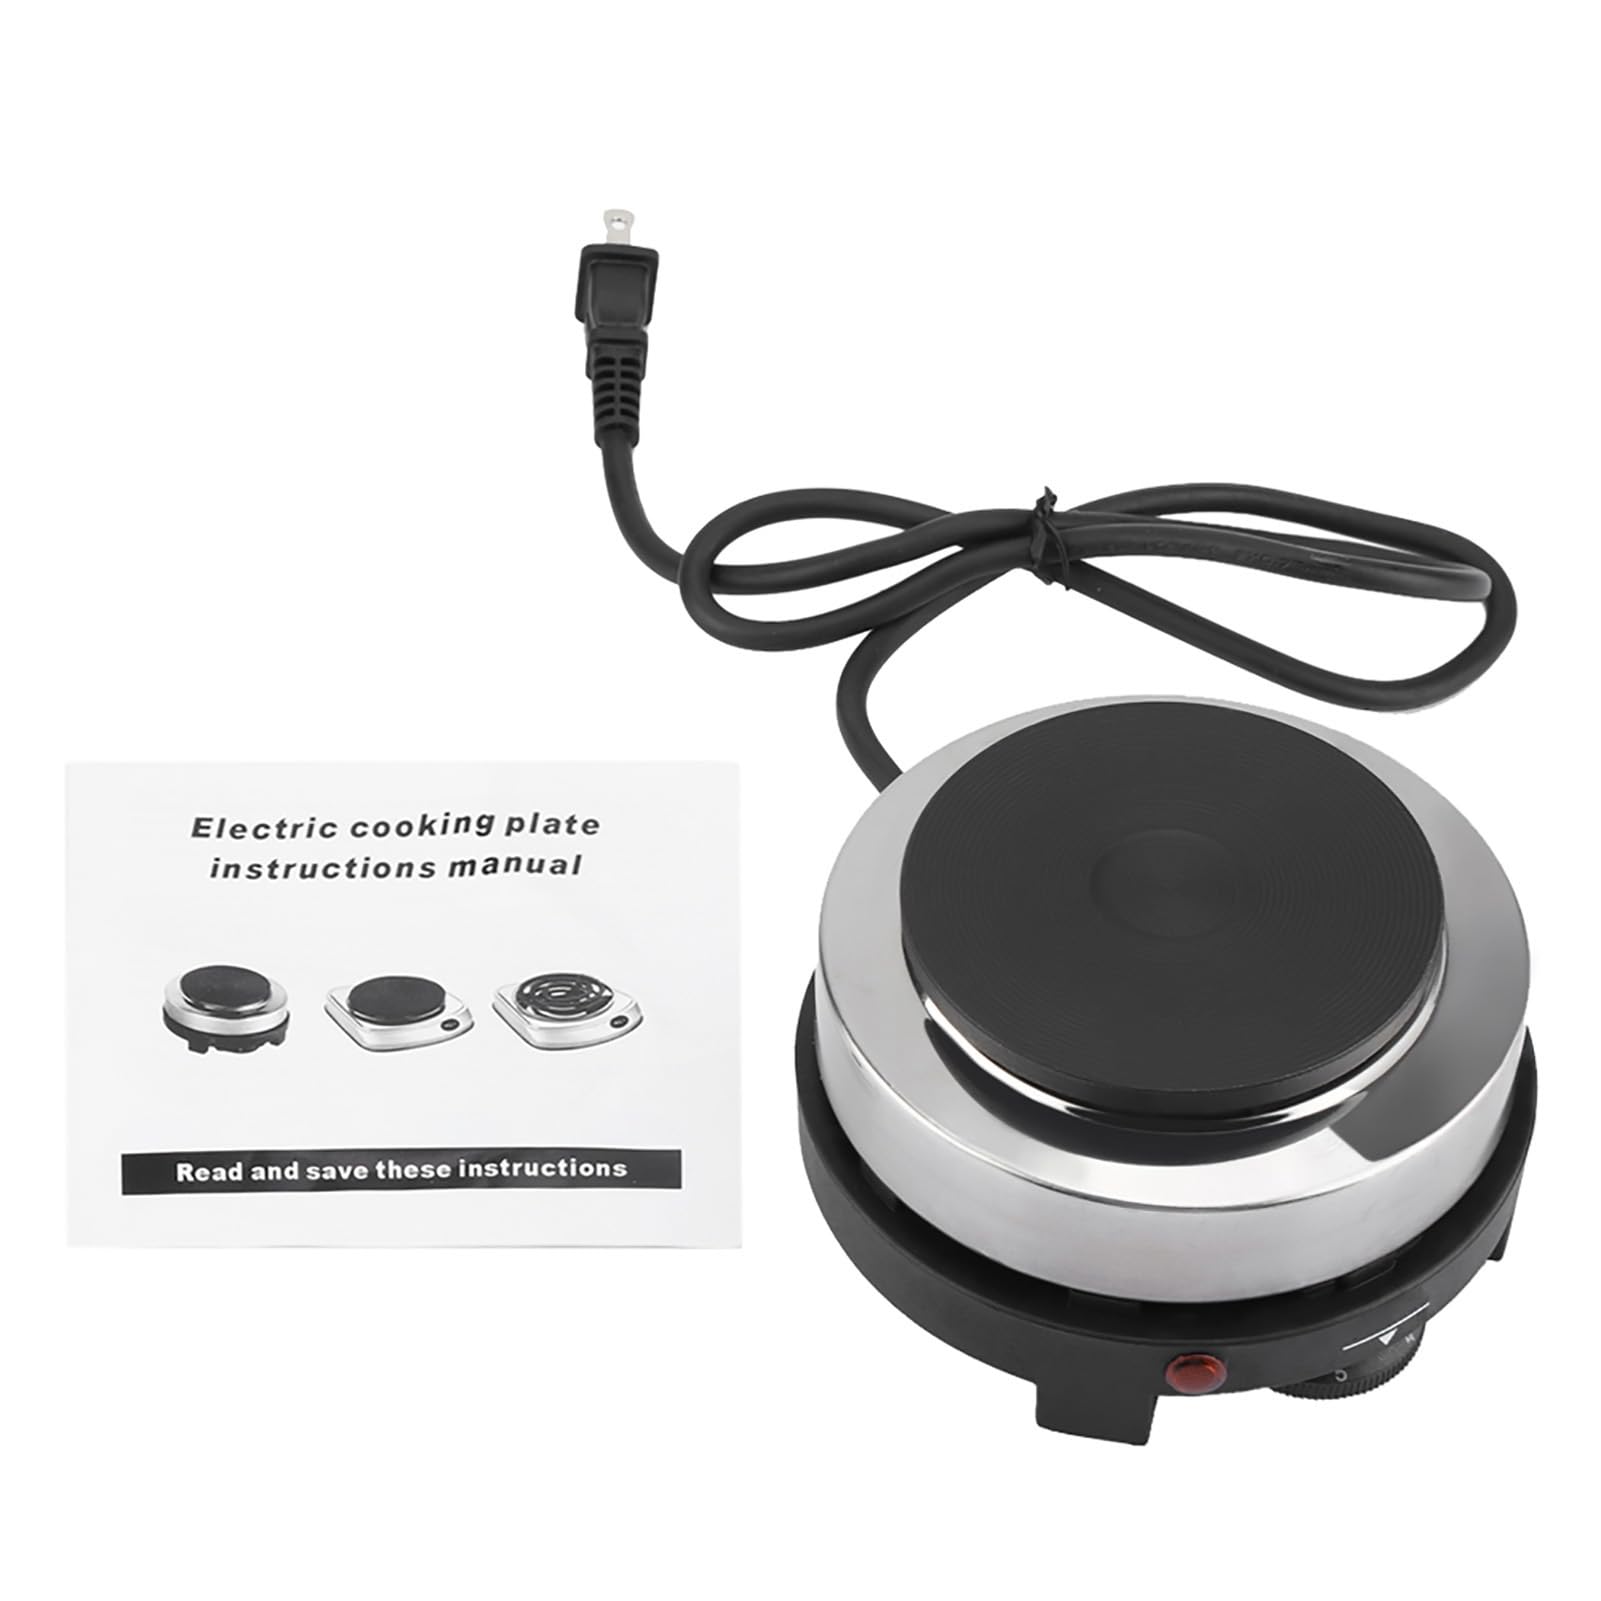 500W Hot Plates for Cooking, Electric Mini Single Burner Hot Plate for Kitchen Outdoor Camping Travel RV, 4 Inch Diameter